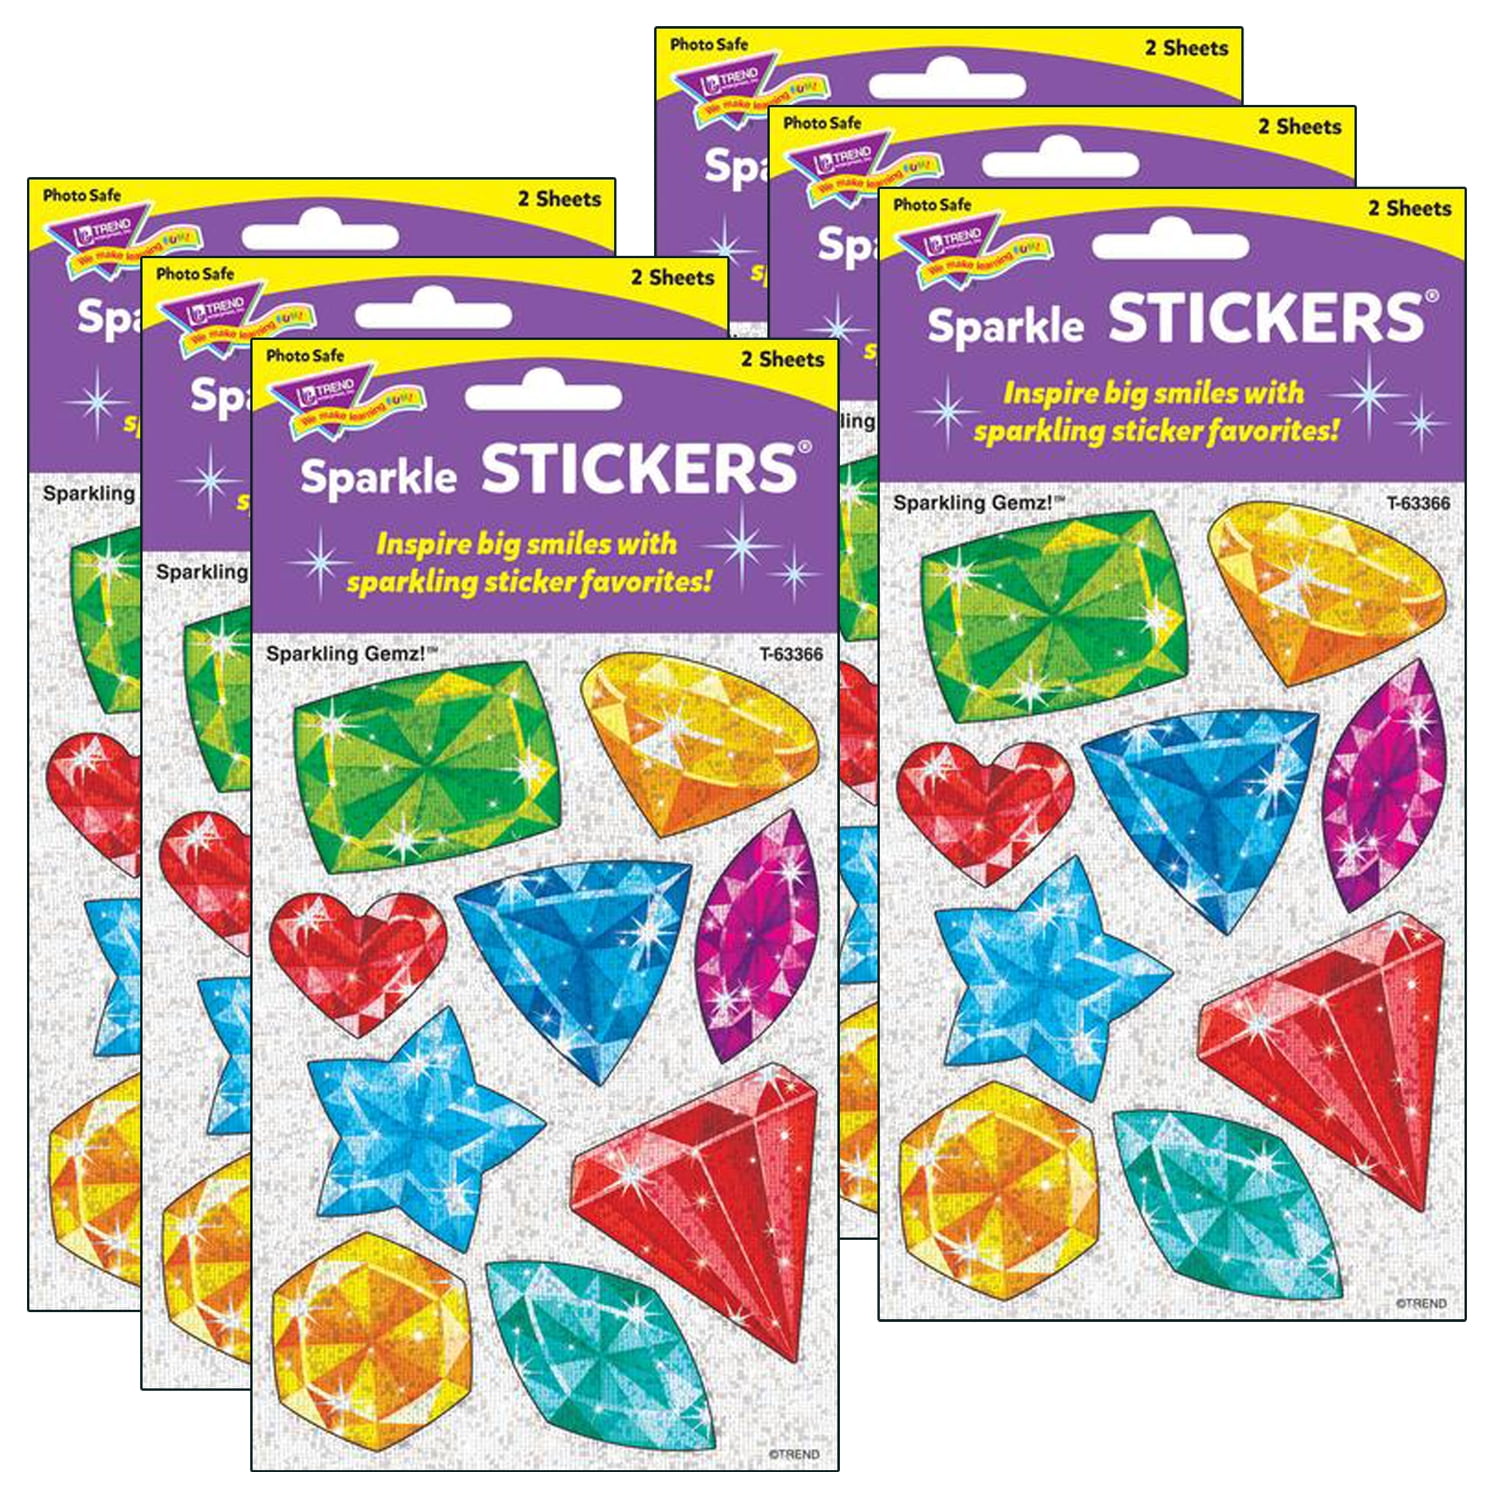 TREND Sparkly Stars, Hearts, & Smiles Sticker Pad, 336 Stickers